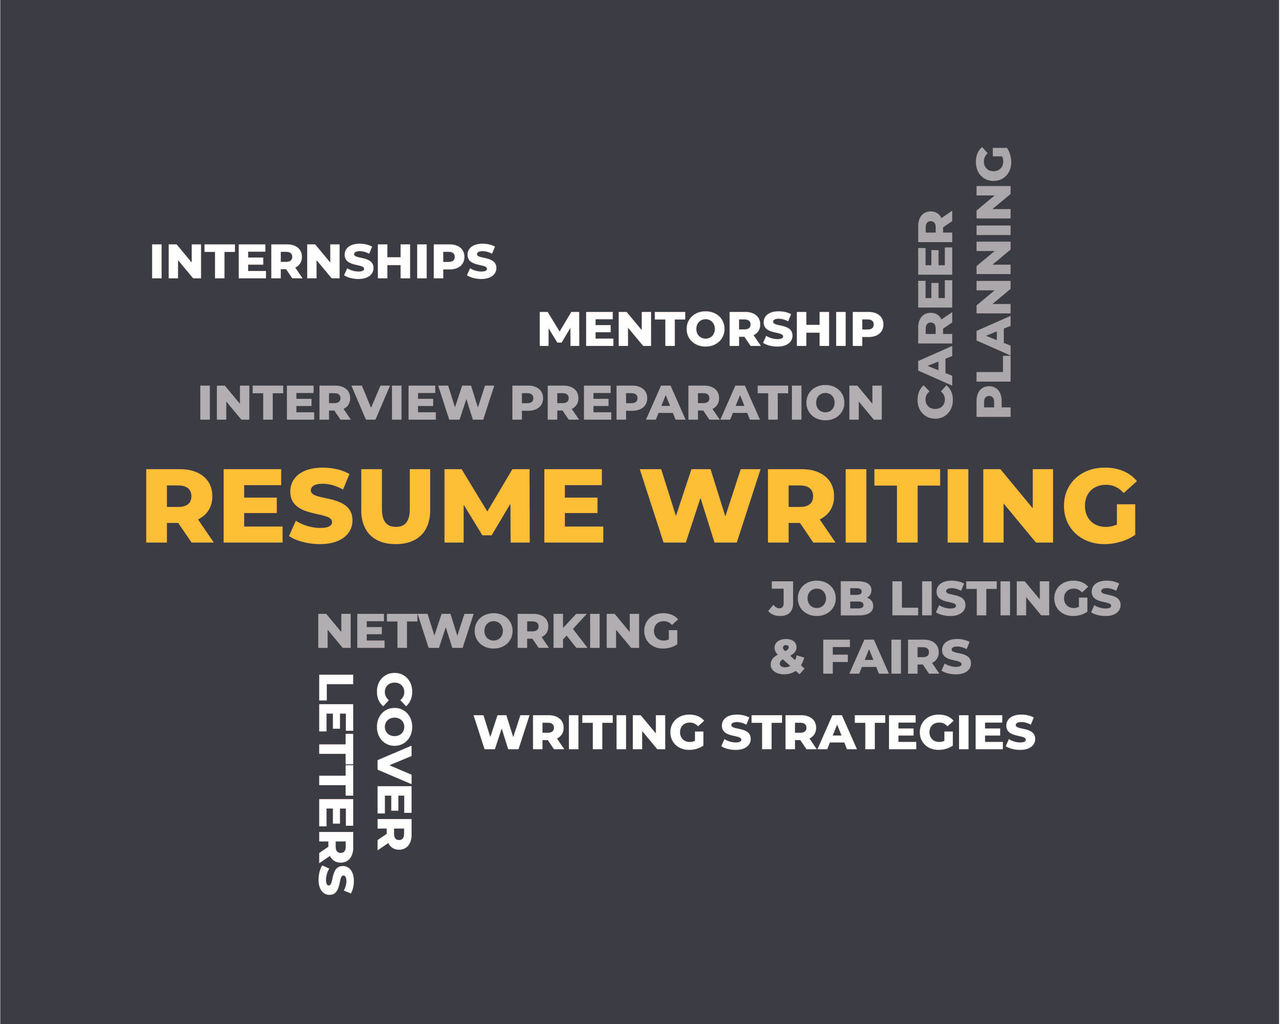 A word cloud that includes the words: internships, mentorship, interview preparation, career planning, résumé writing, networking, job listings & fairs, writing strategies, and cover letters.